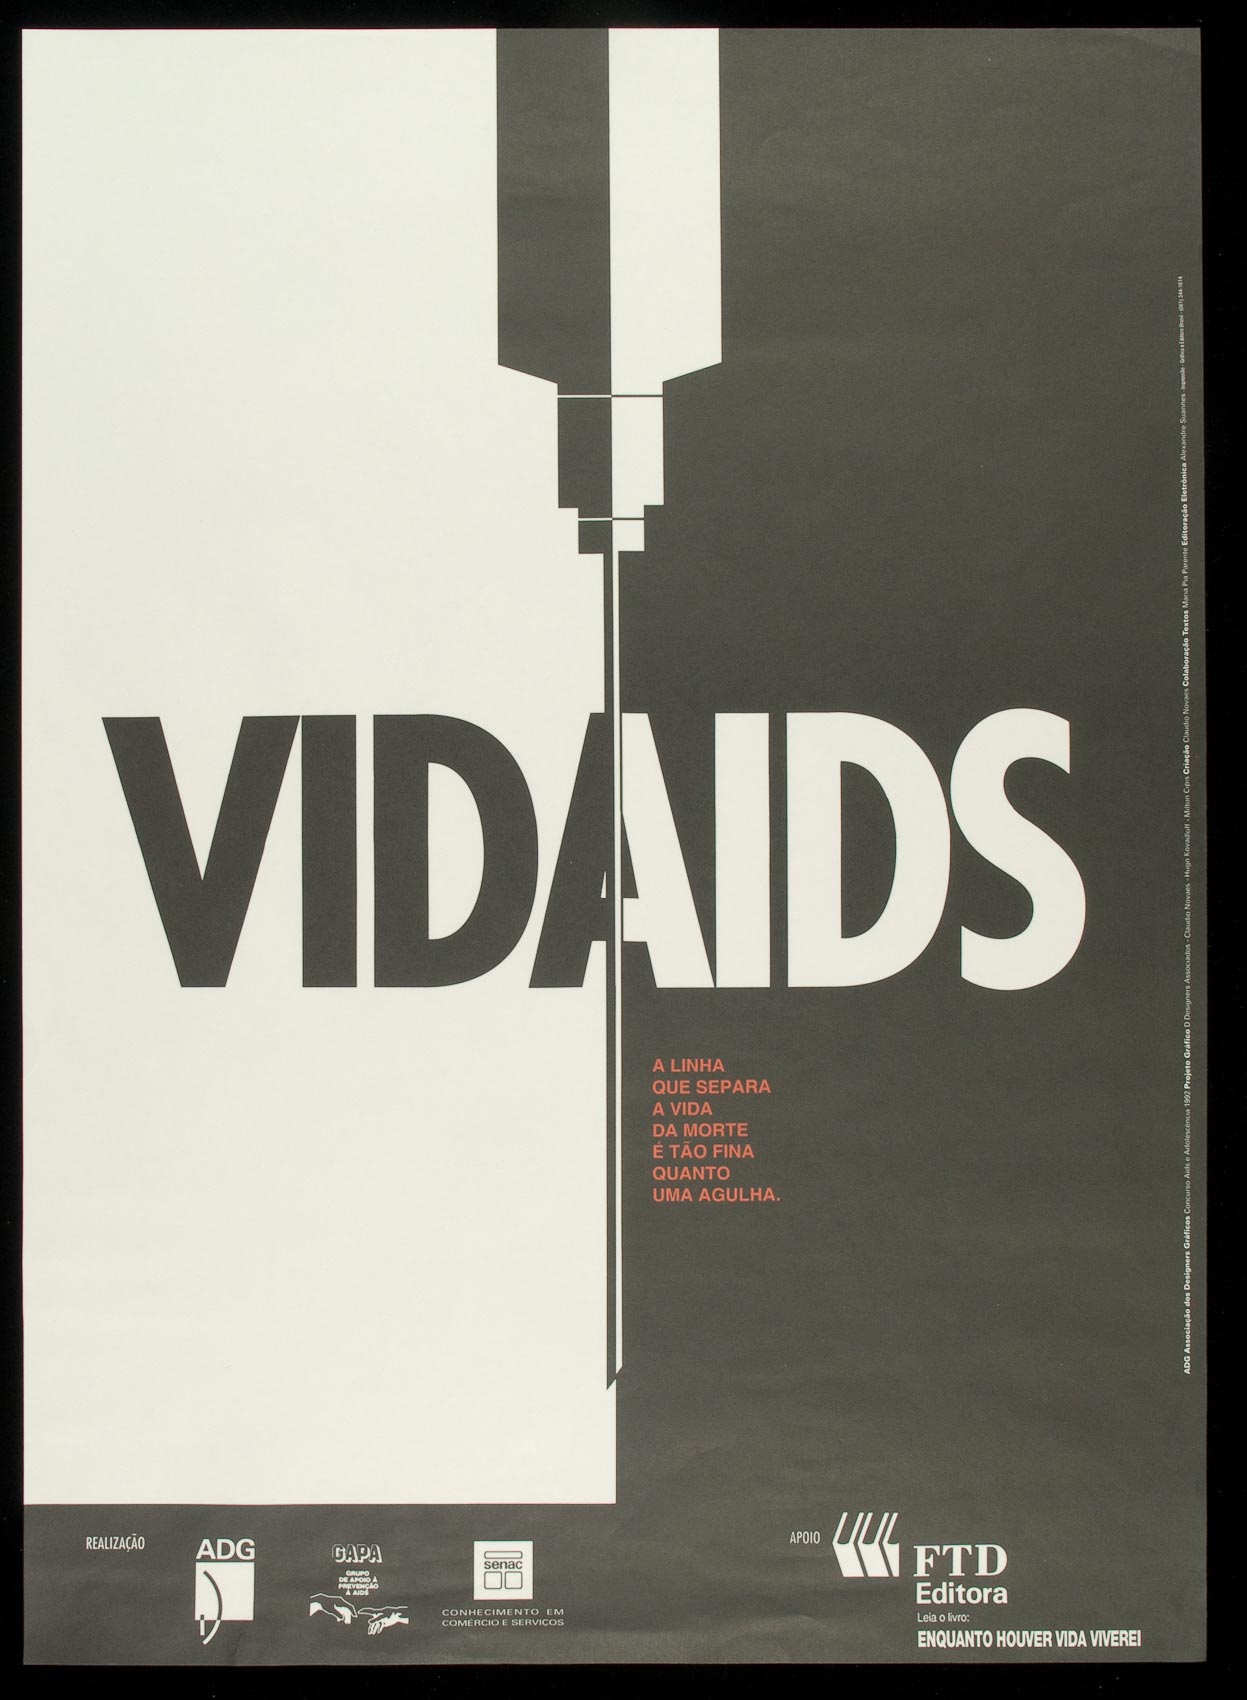 A hypodermic needle bifurcates the shared A in the text VIDA AIDS; one side the text is black on white, on the other it's reversed.